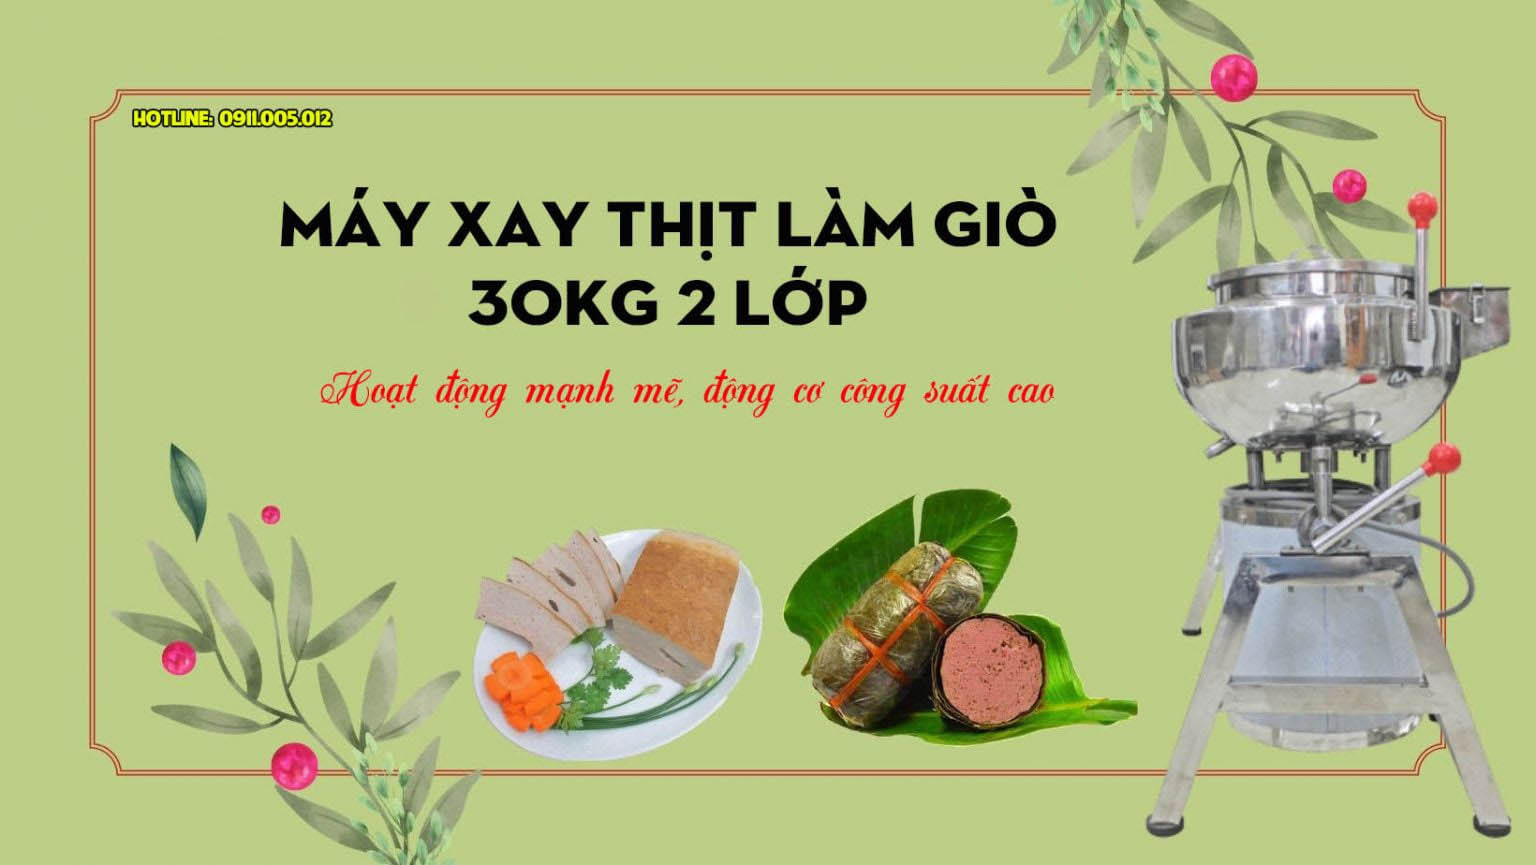 may-xay-thit-lam-gio-30kg-2-lop